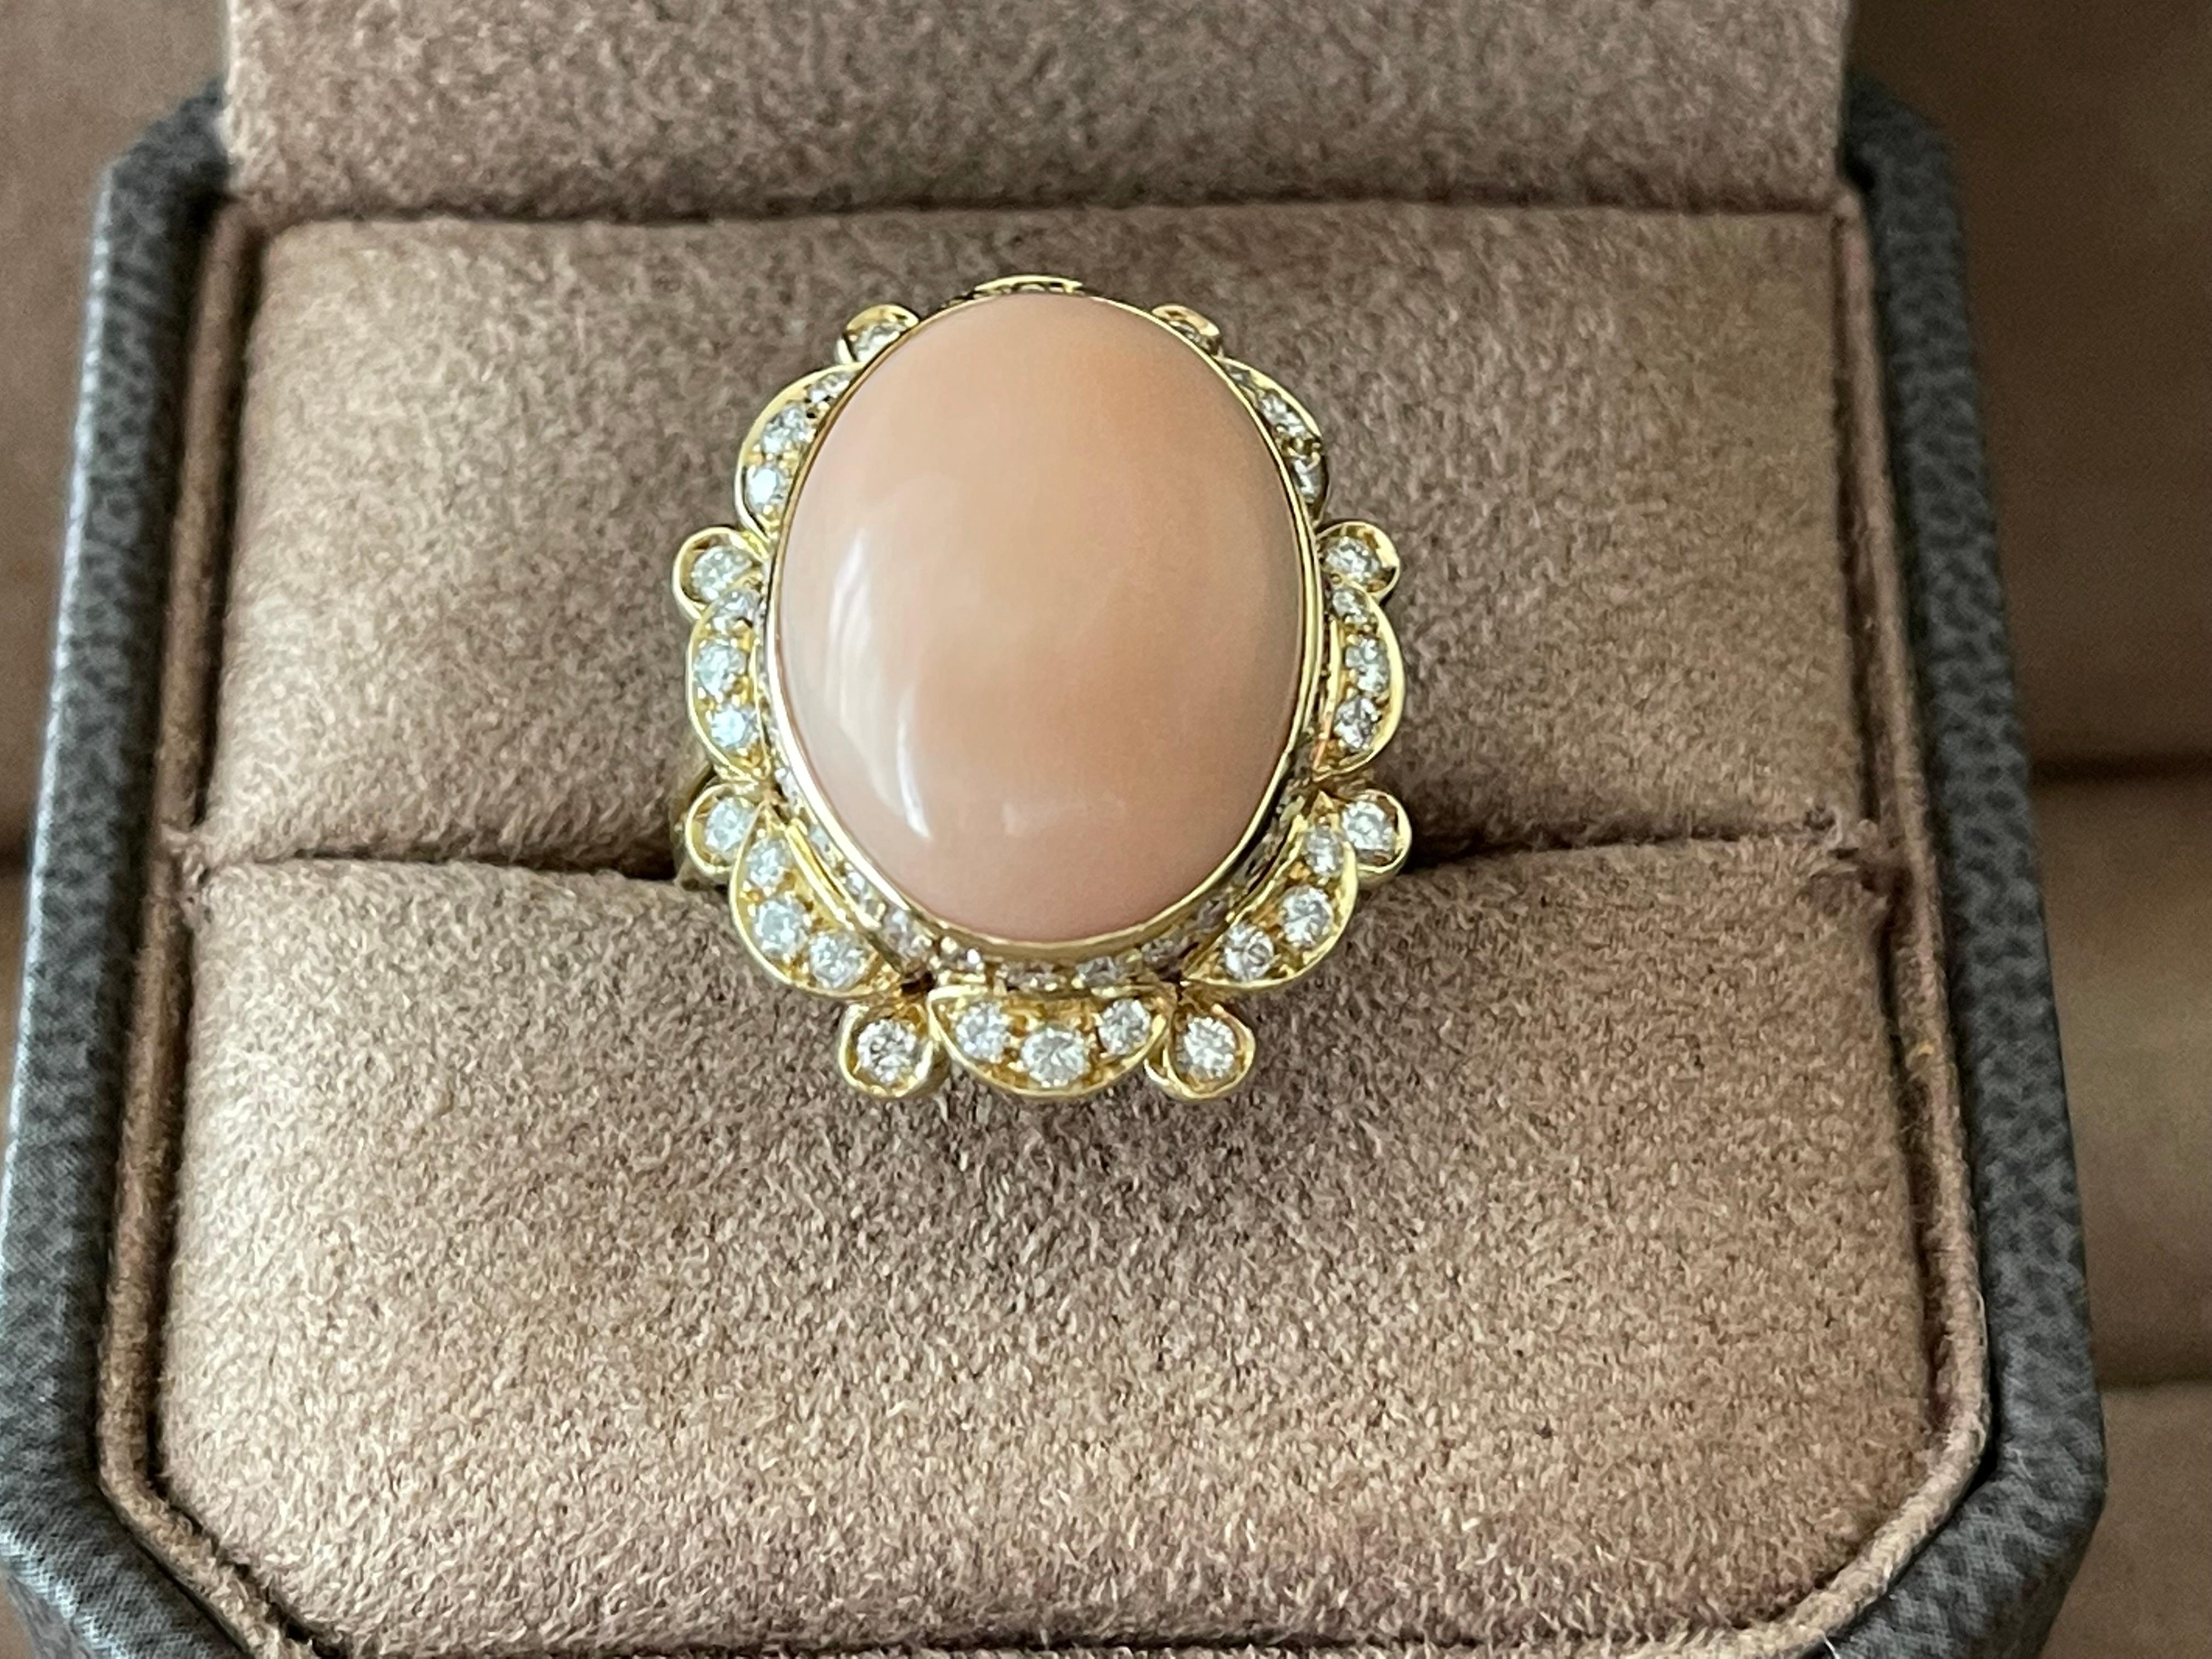 Stylish 18 K yellow Gold Vintage Ring featuring an angel skin Coral Cabochon estimated approximately 8 ct and 64brillinat cut Diamonds weighing approximately 1.28 ct, G color, vs clarity. The 
The face of the ring measures 2.7 cm x 2.1 cm. The ring